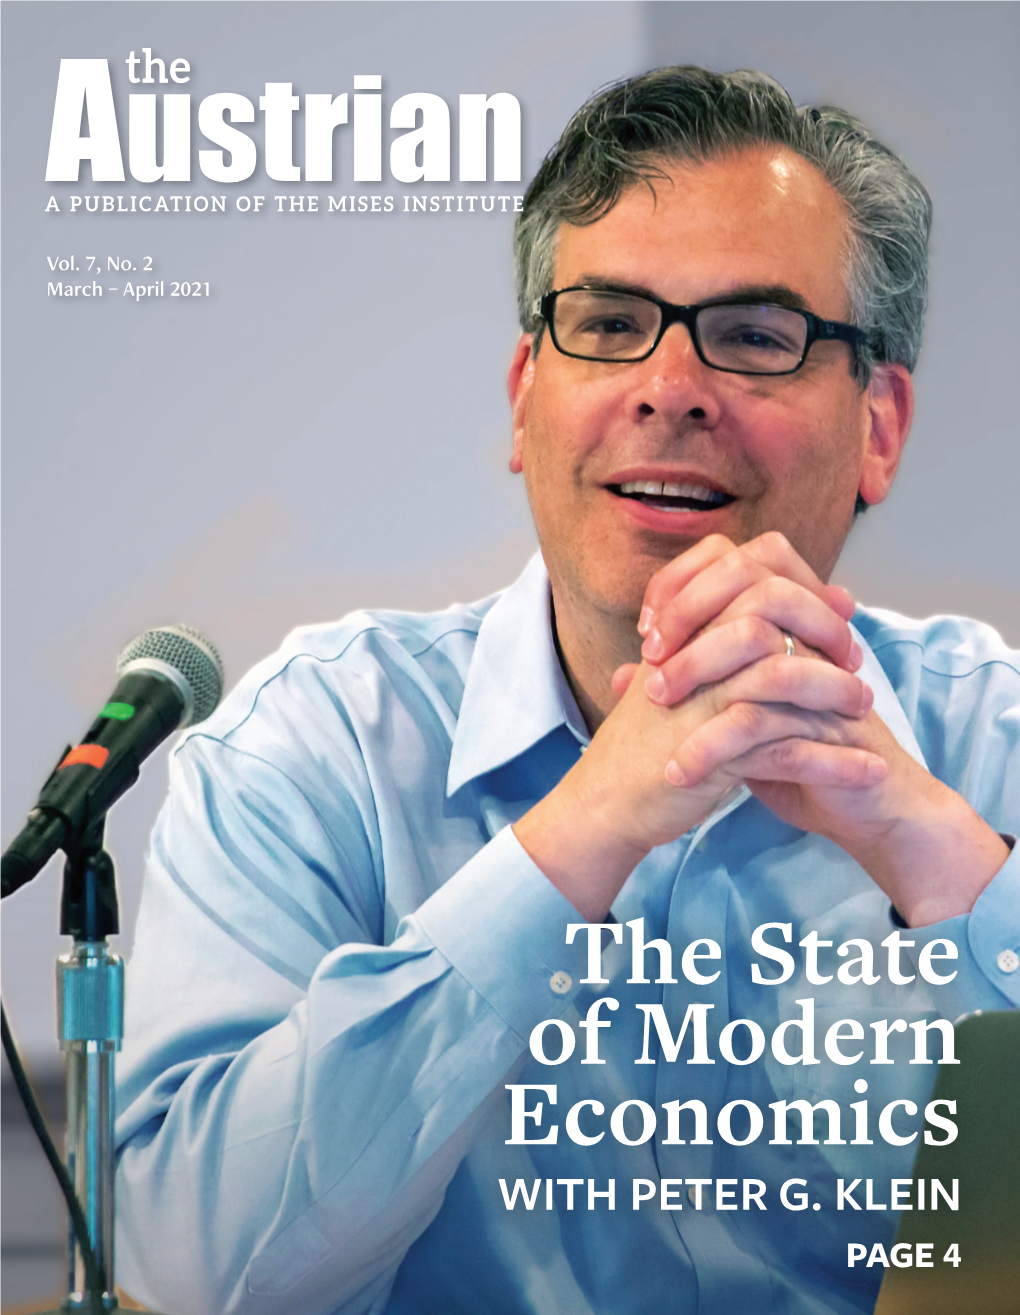 The State of Modern Economics with PETER G KLEIN PAGE 4 3 Jeﬀ Deist – from the Publisher